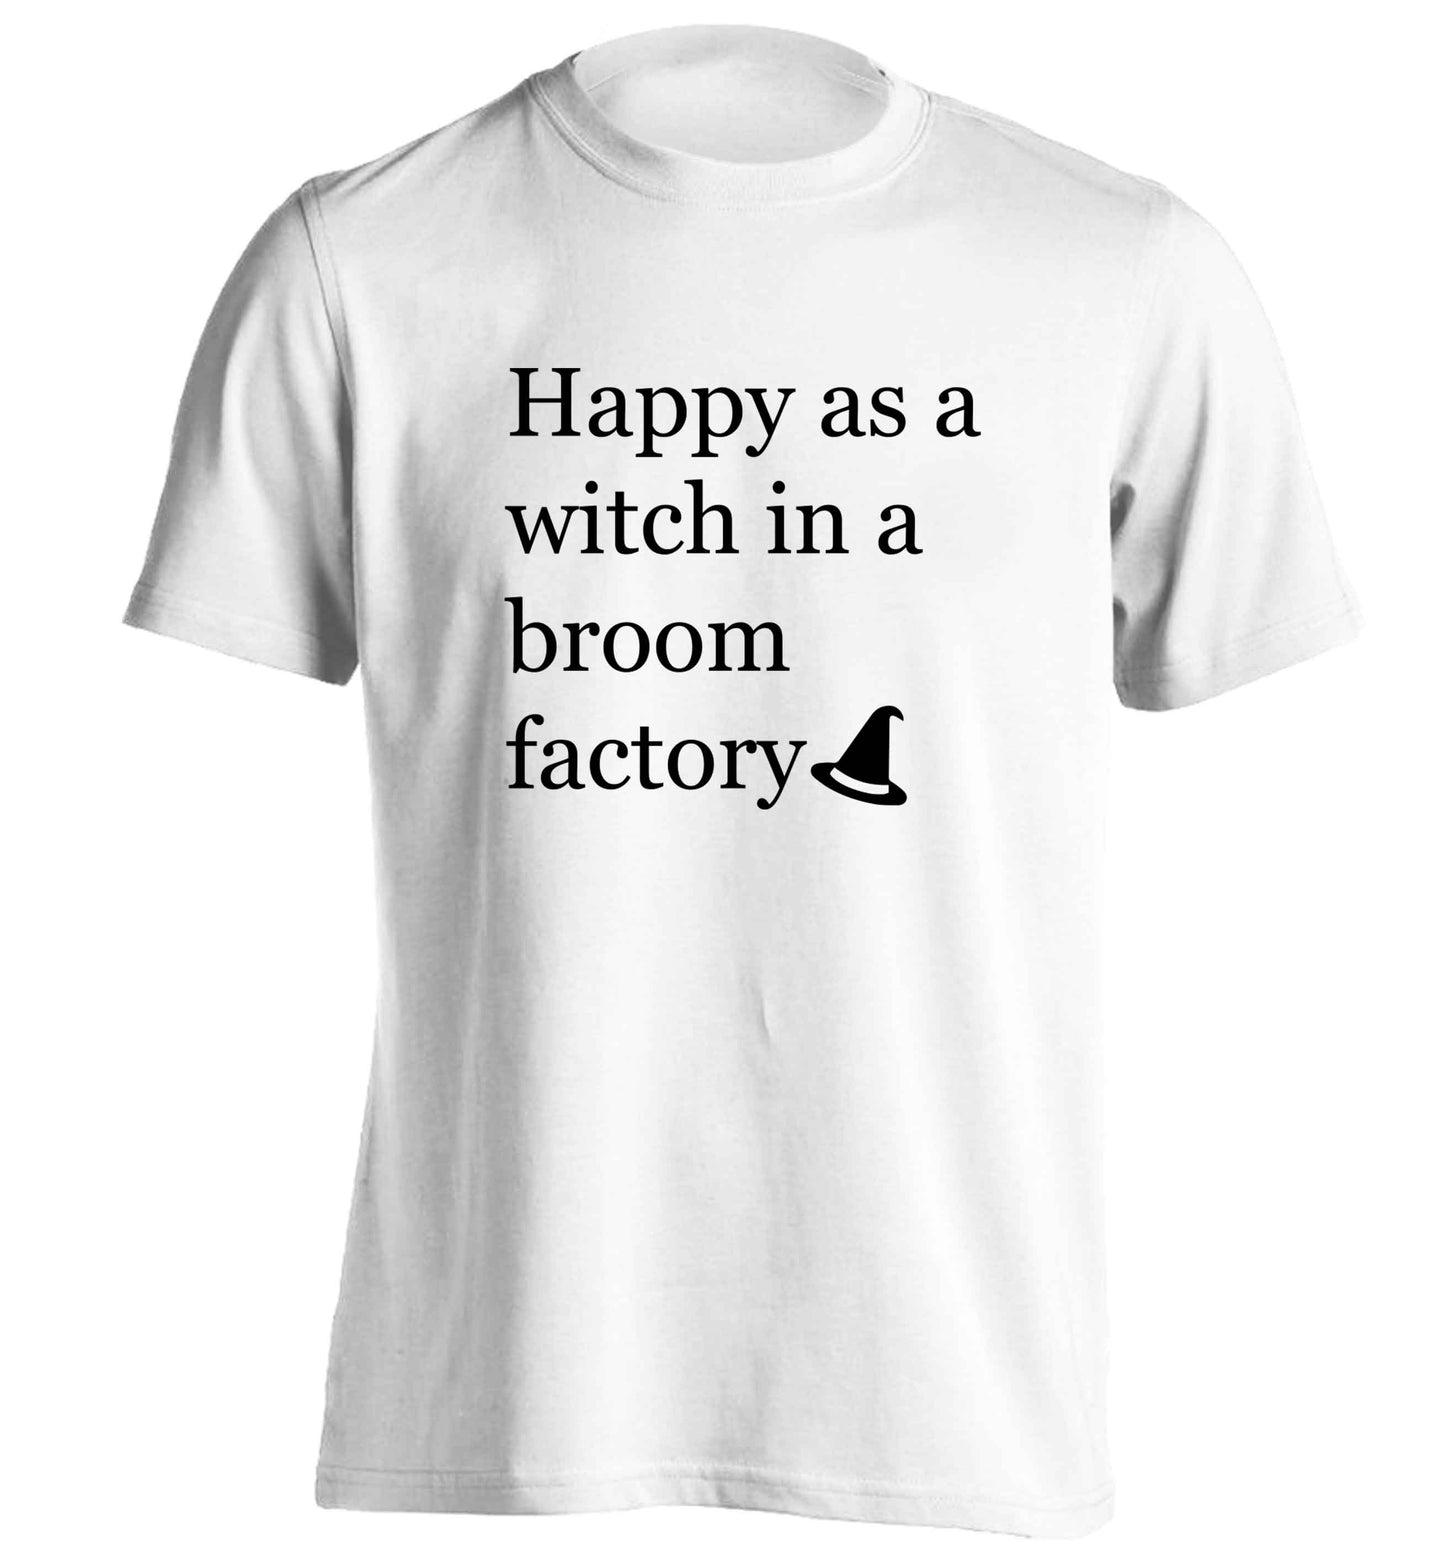 Happy as a witch in a broom factory adults unisex white Tshirt 2XL